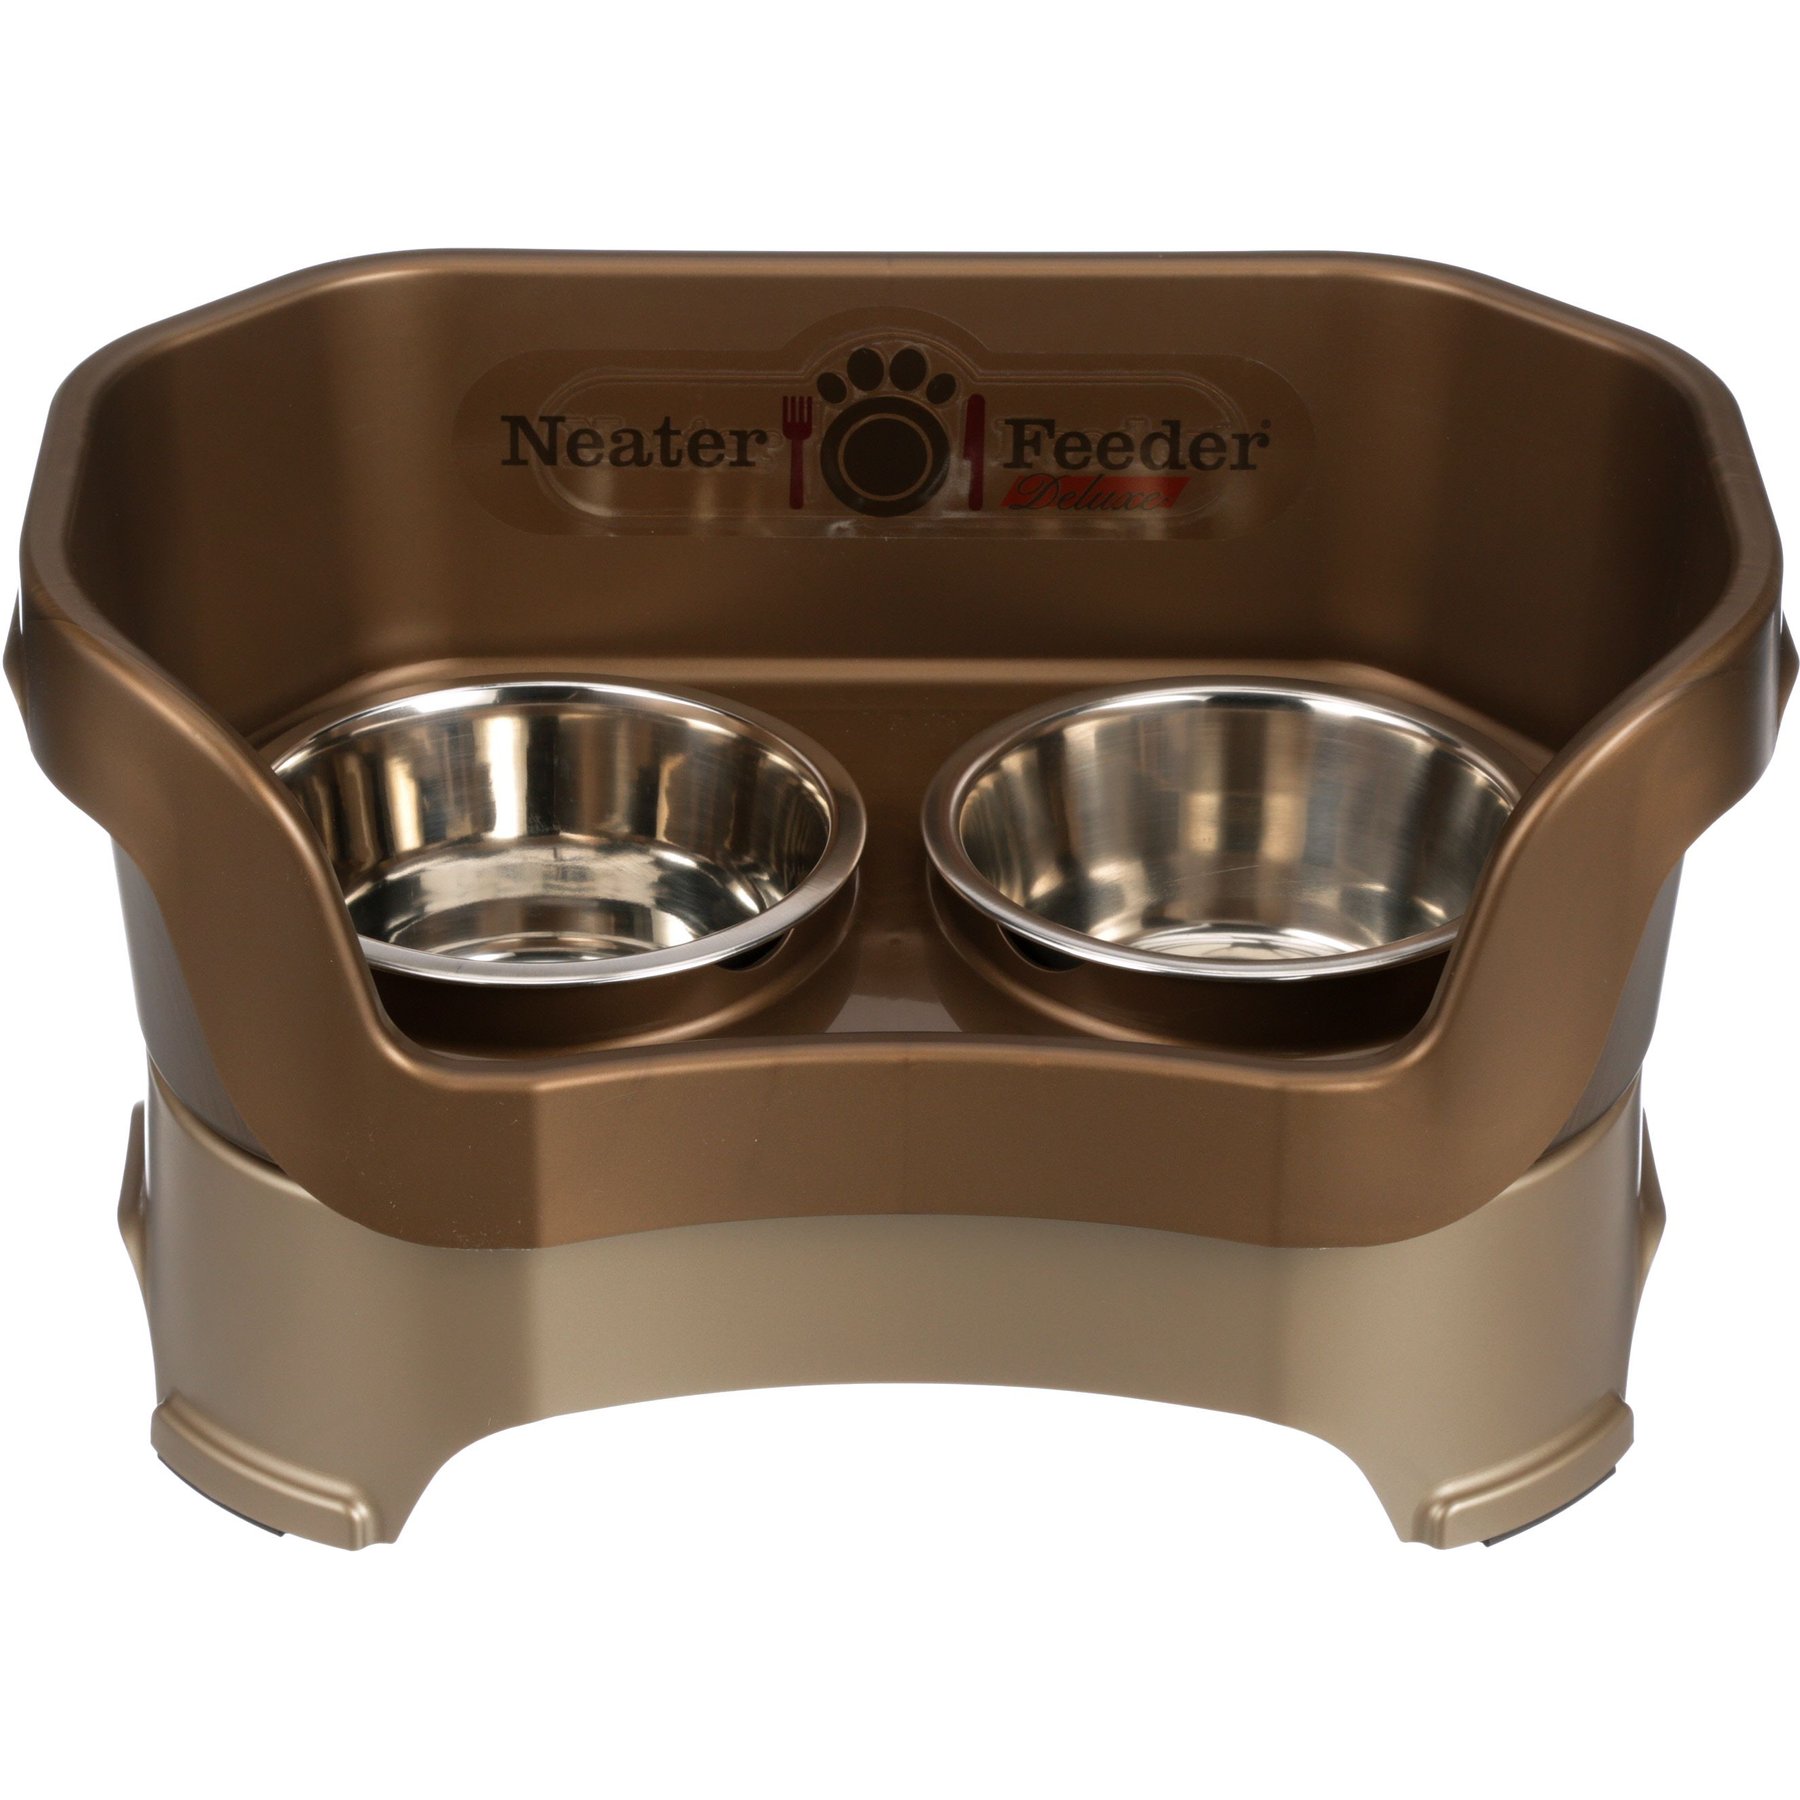 2 Pack Elevated Dog Bowls Raised Dog Bowls with 4 Stainless Steel